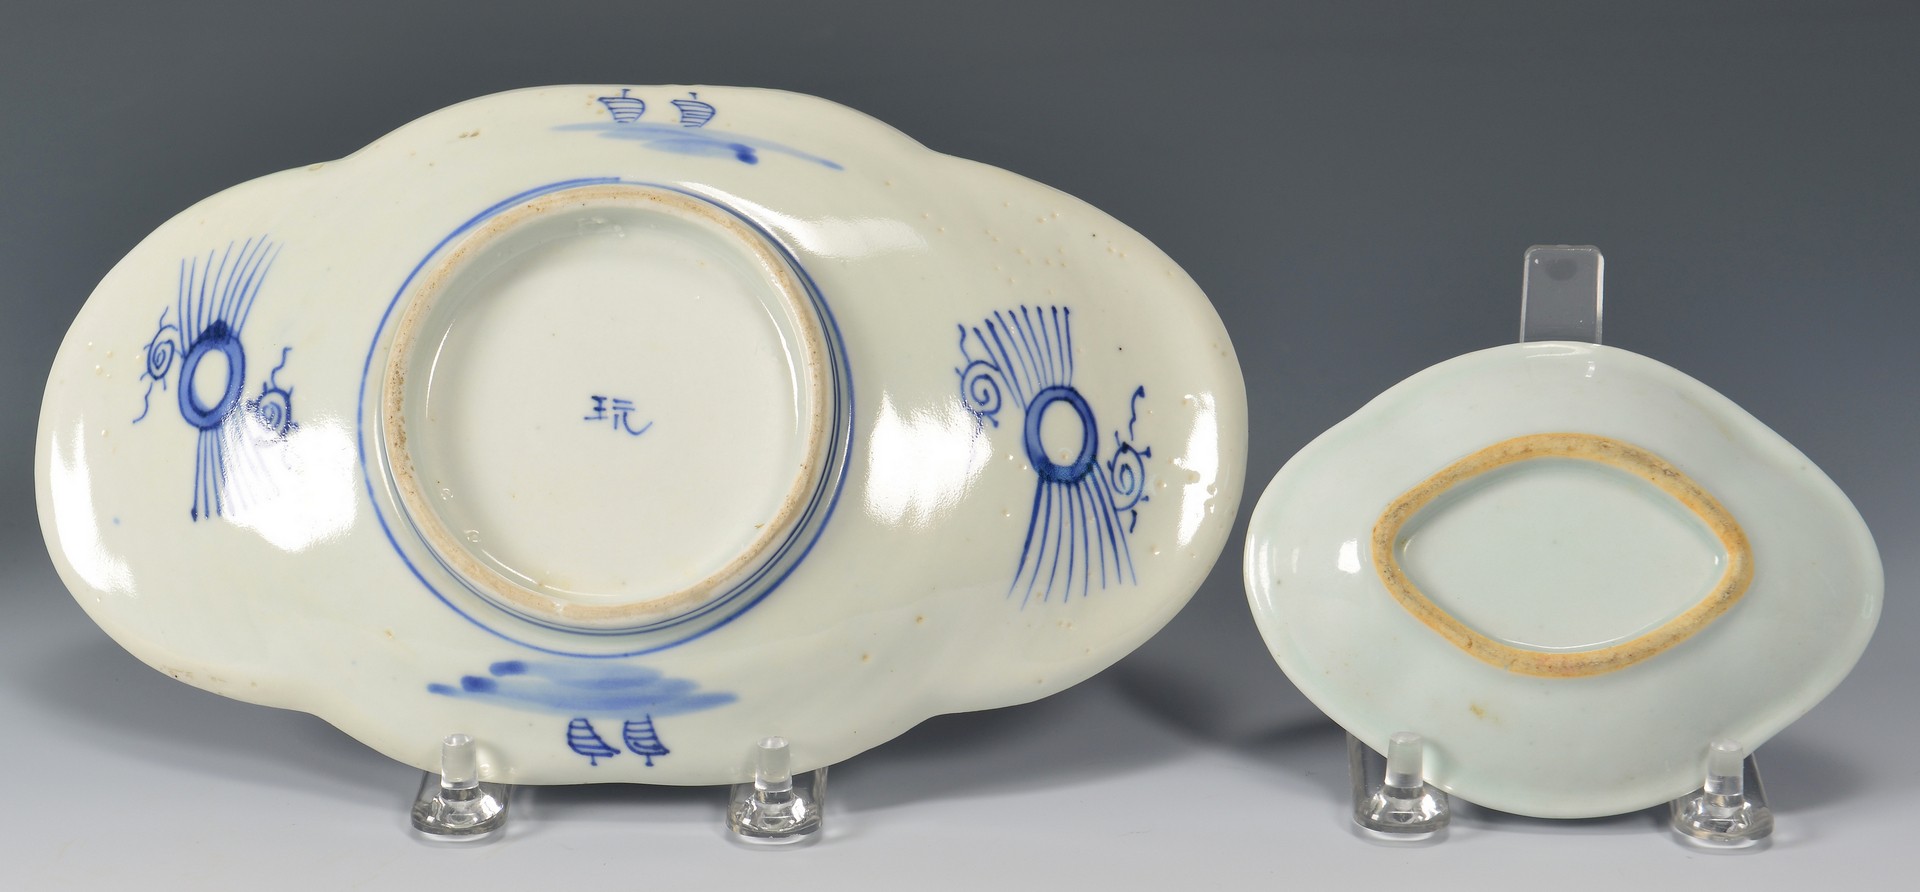 Lot 22: 5 Chinese Blue and White Porcelain Items